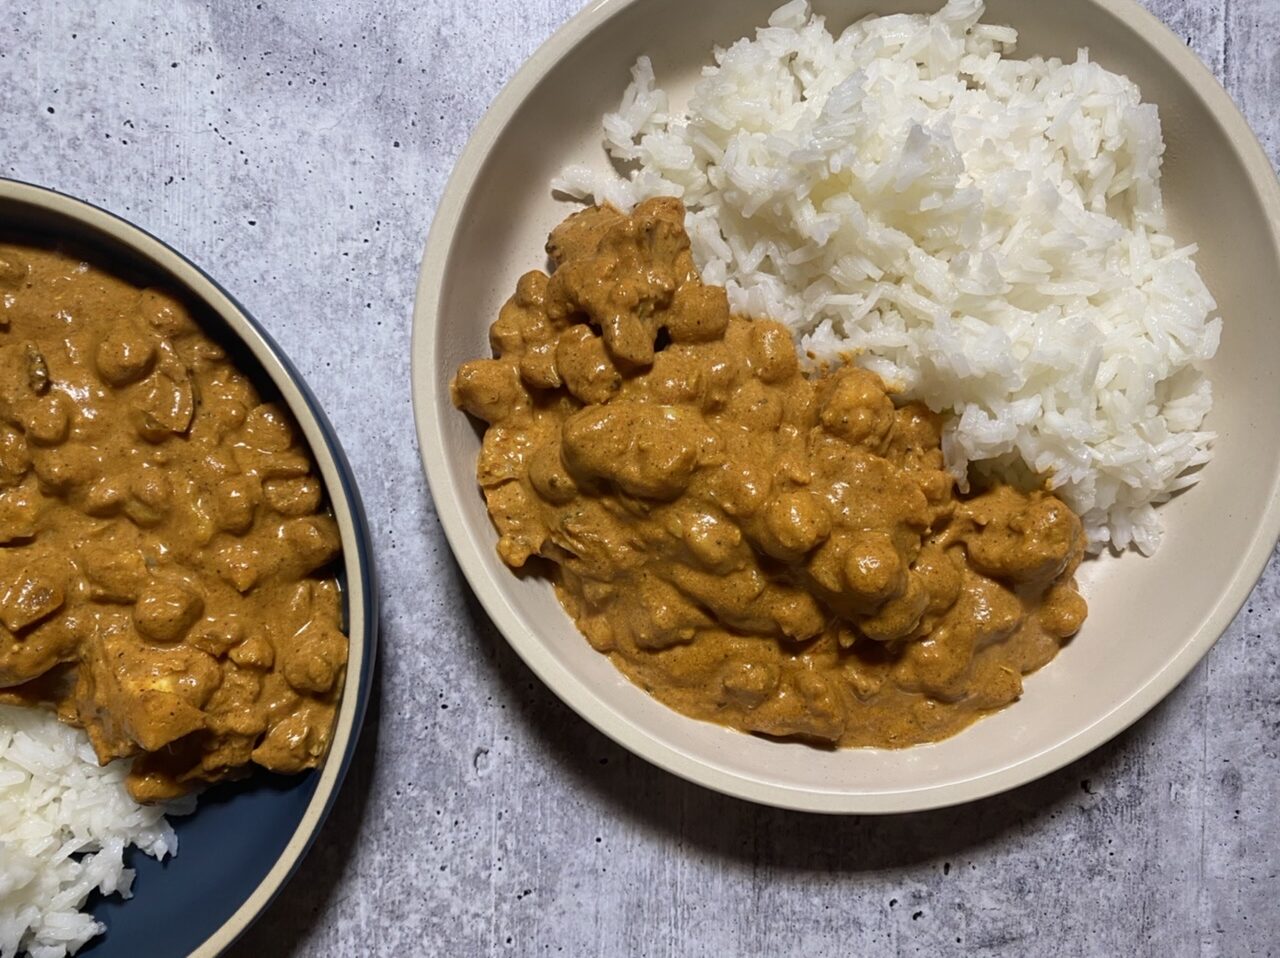 076F32EA 9104 443D ACDB 0ABC6C0B2FF7 e1605982180799 - Meatless Monday Cauliflower & Chickpea Butter Curry